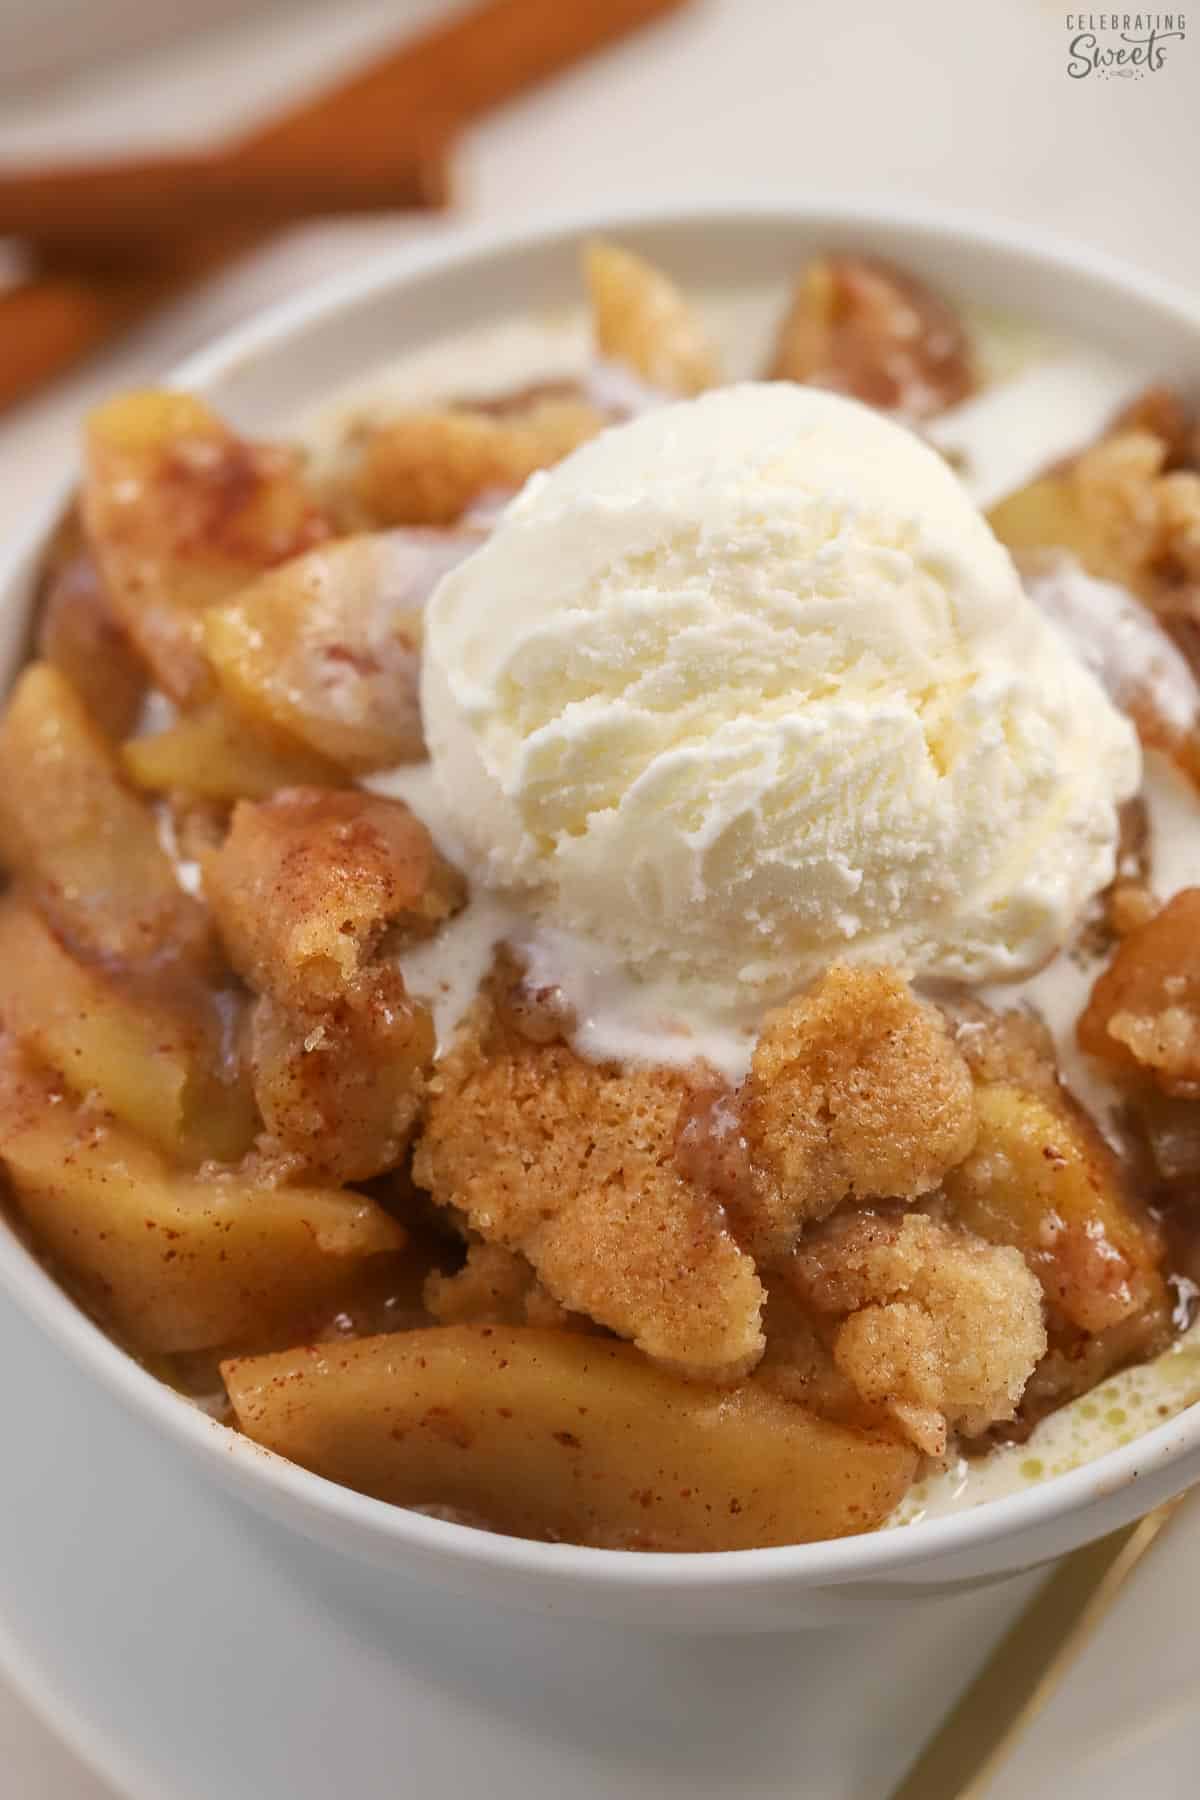 Apple cobbler in a white bowl with a scoop of vanilla ice cream on top.